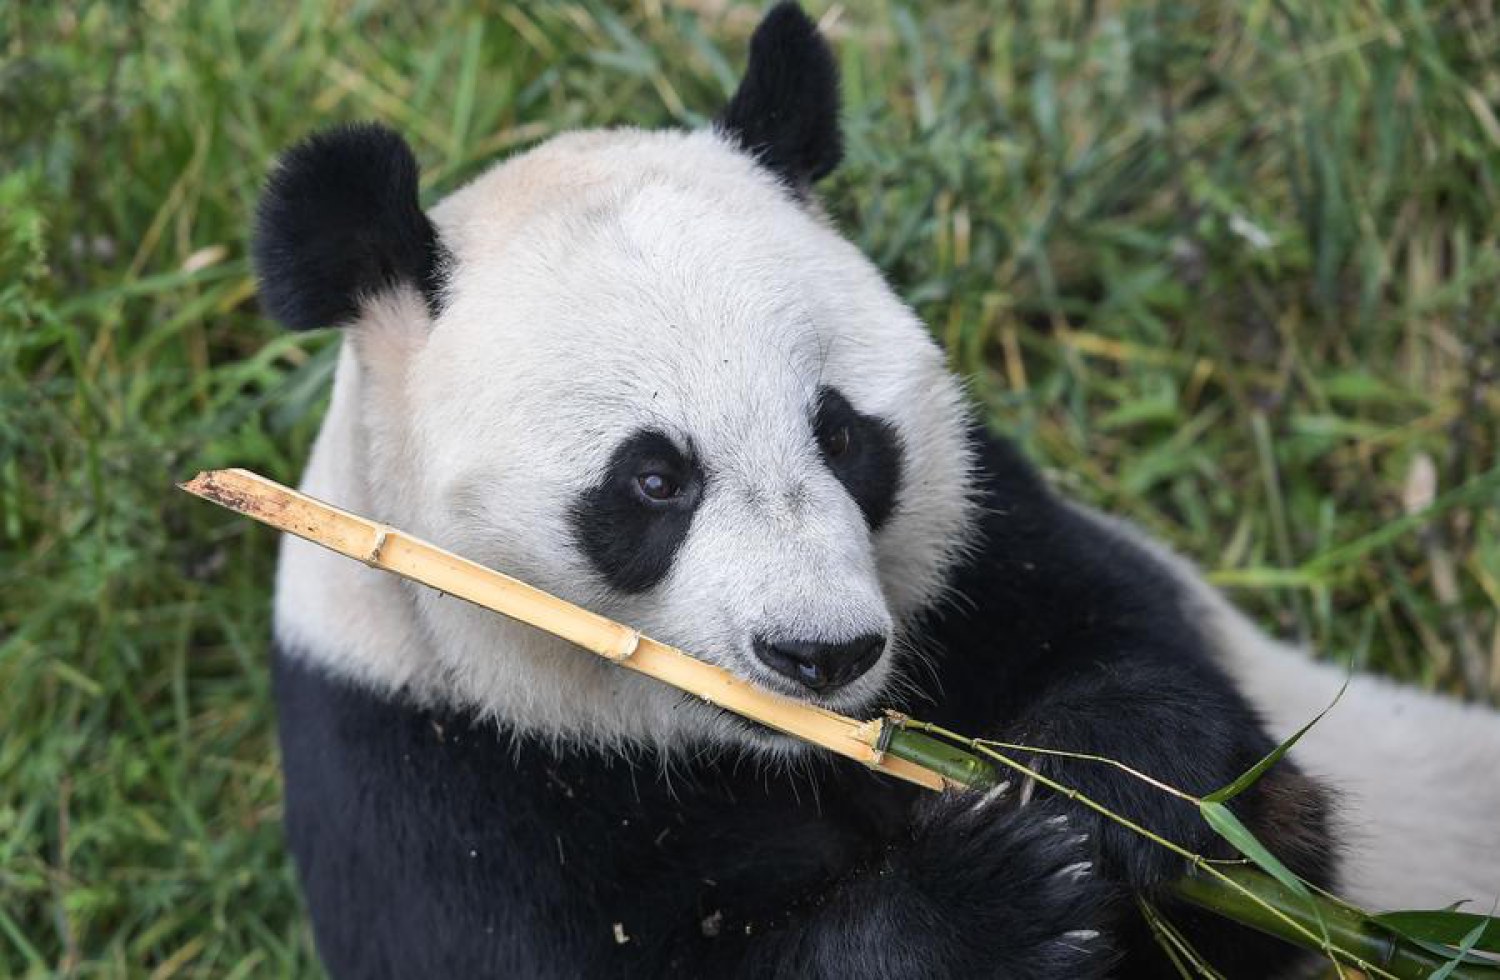 A giant panda eats bamboo at the China Conservation and Research Center for the Giant Panda in Wolong, Southwest China's Sichuan province, Sept 26, 2017. [Photo/Xinhua]